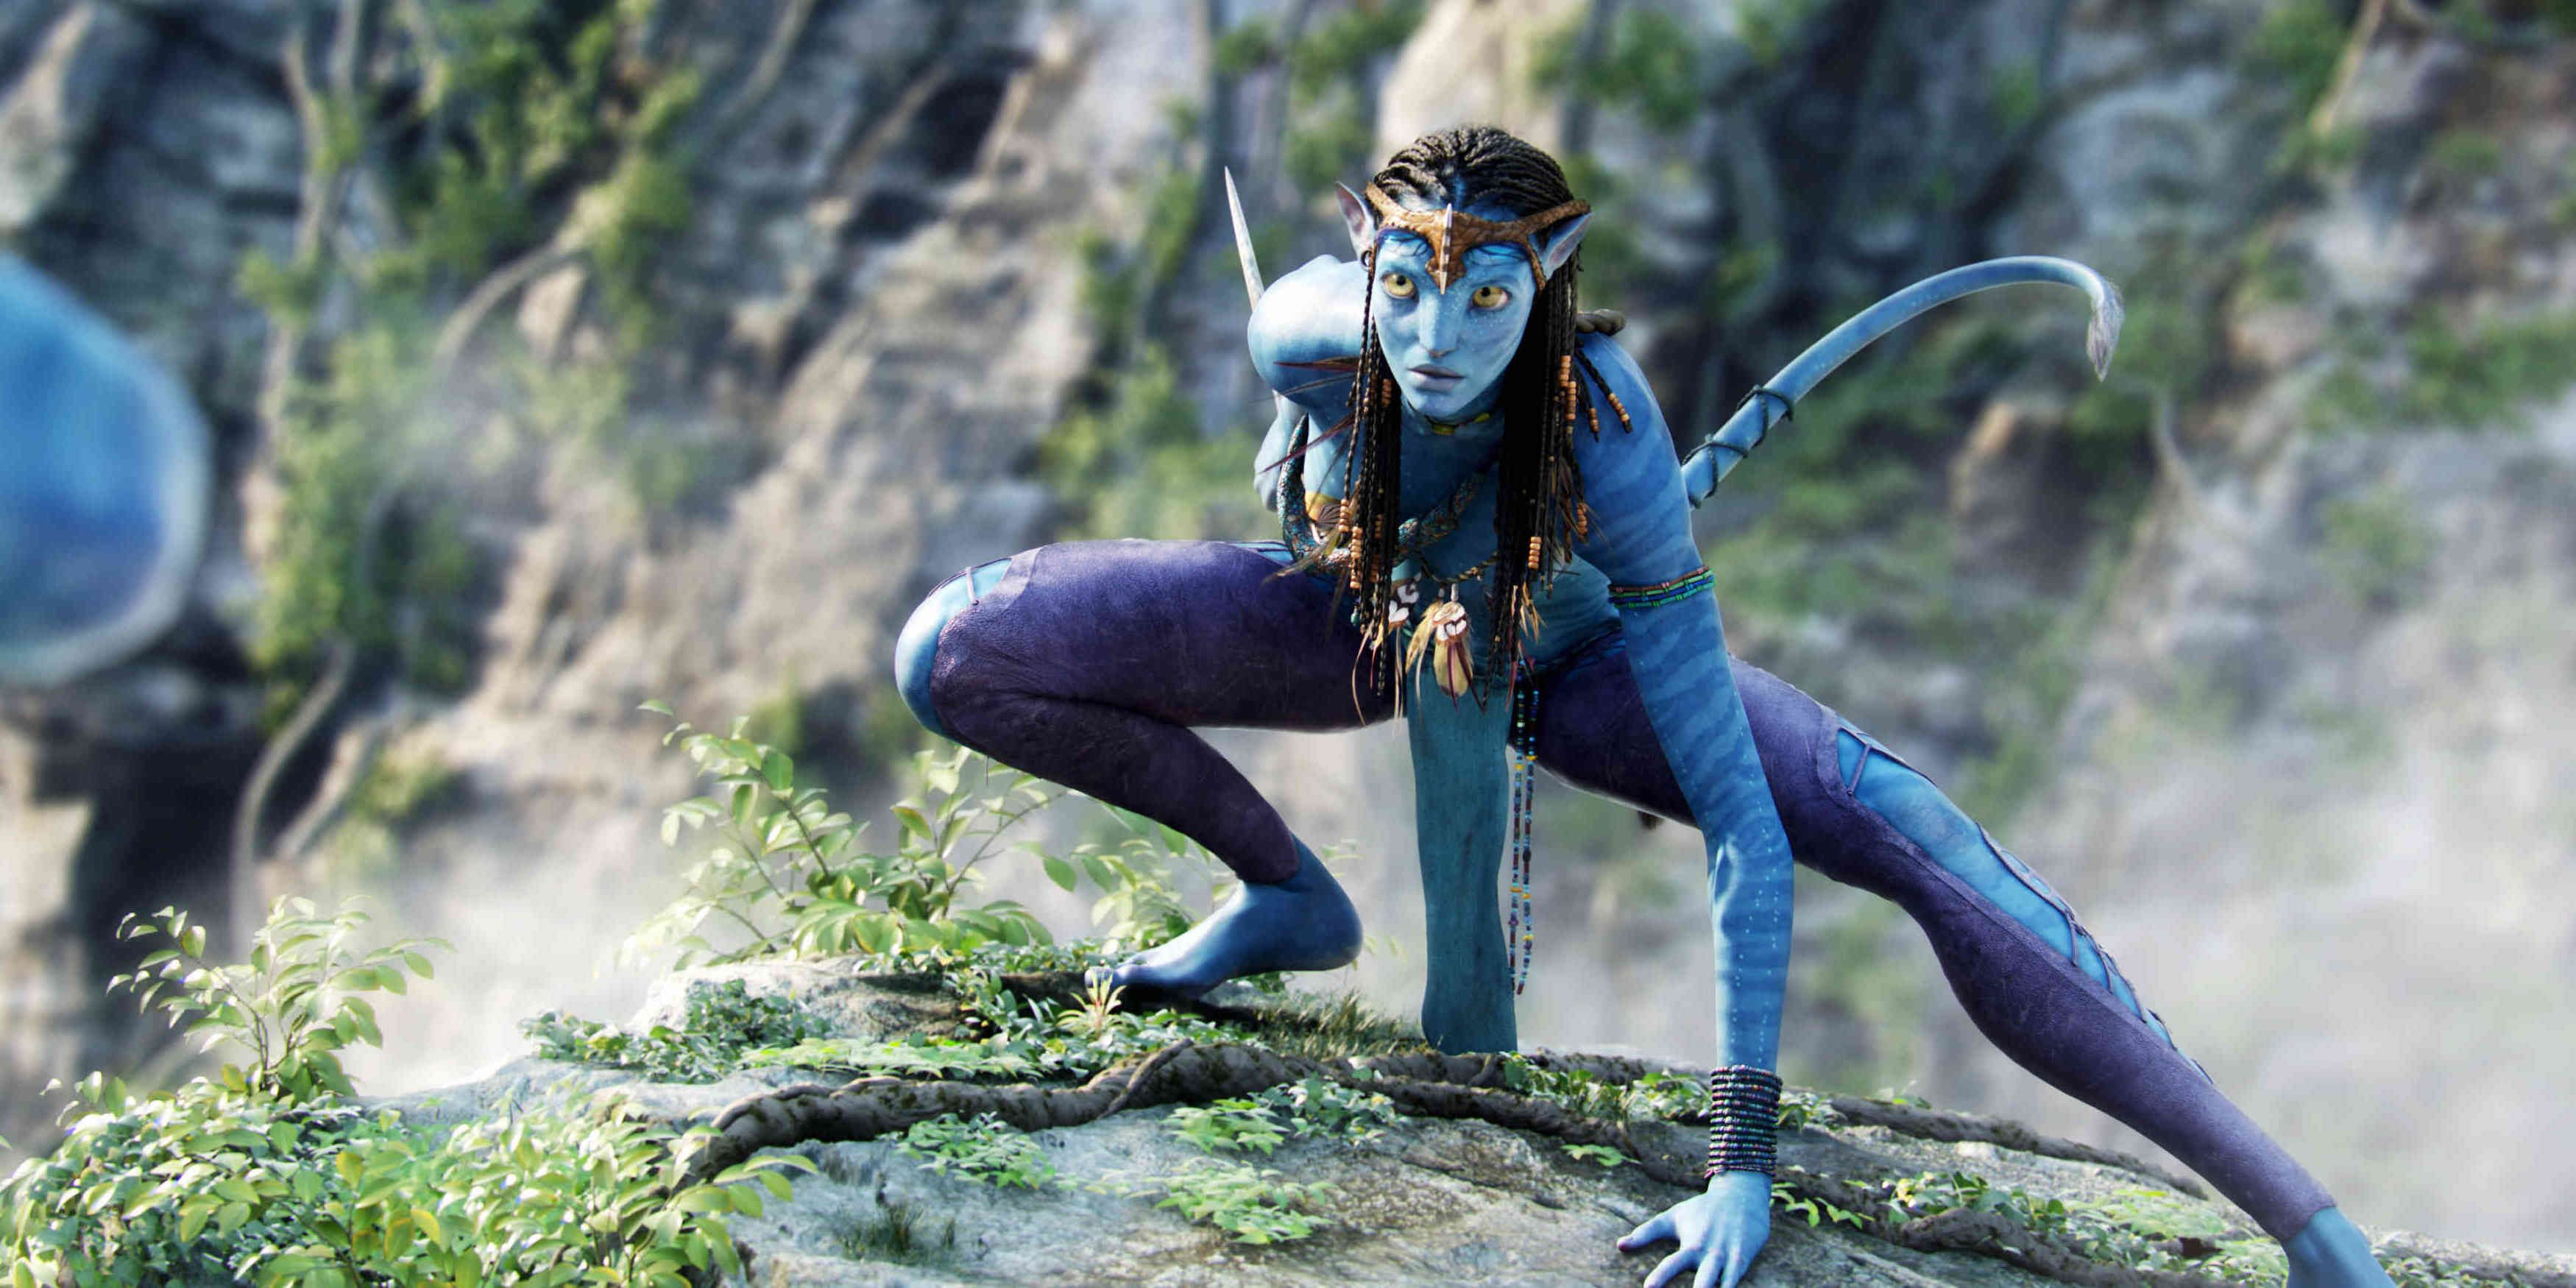 James Cameron Confident Avatar 5 Will Release on Schedule in 2025